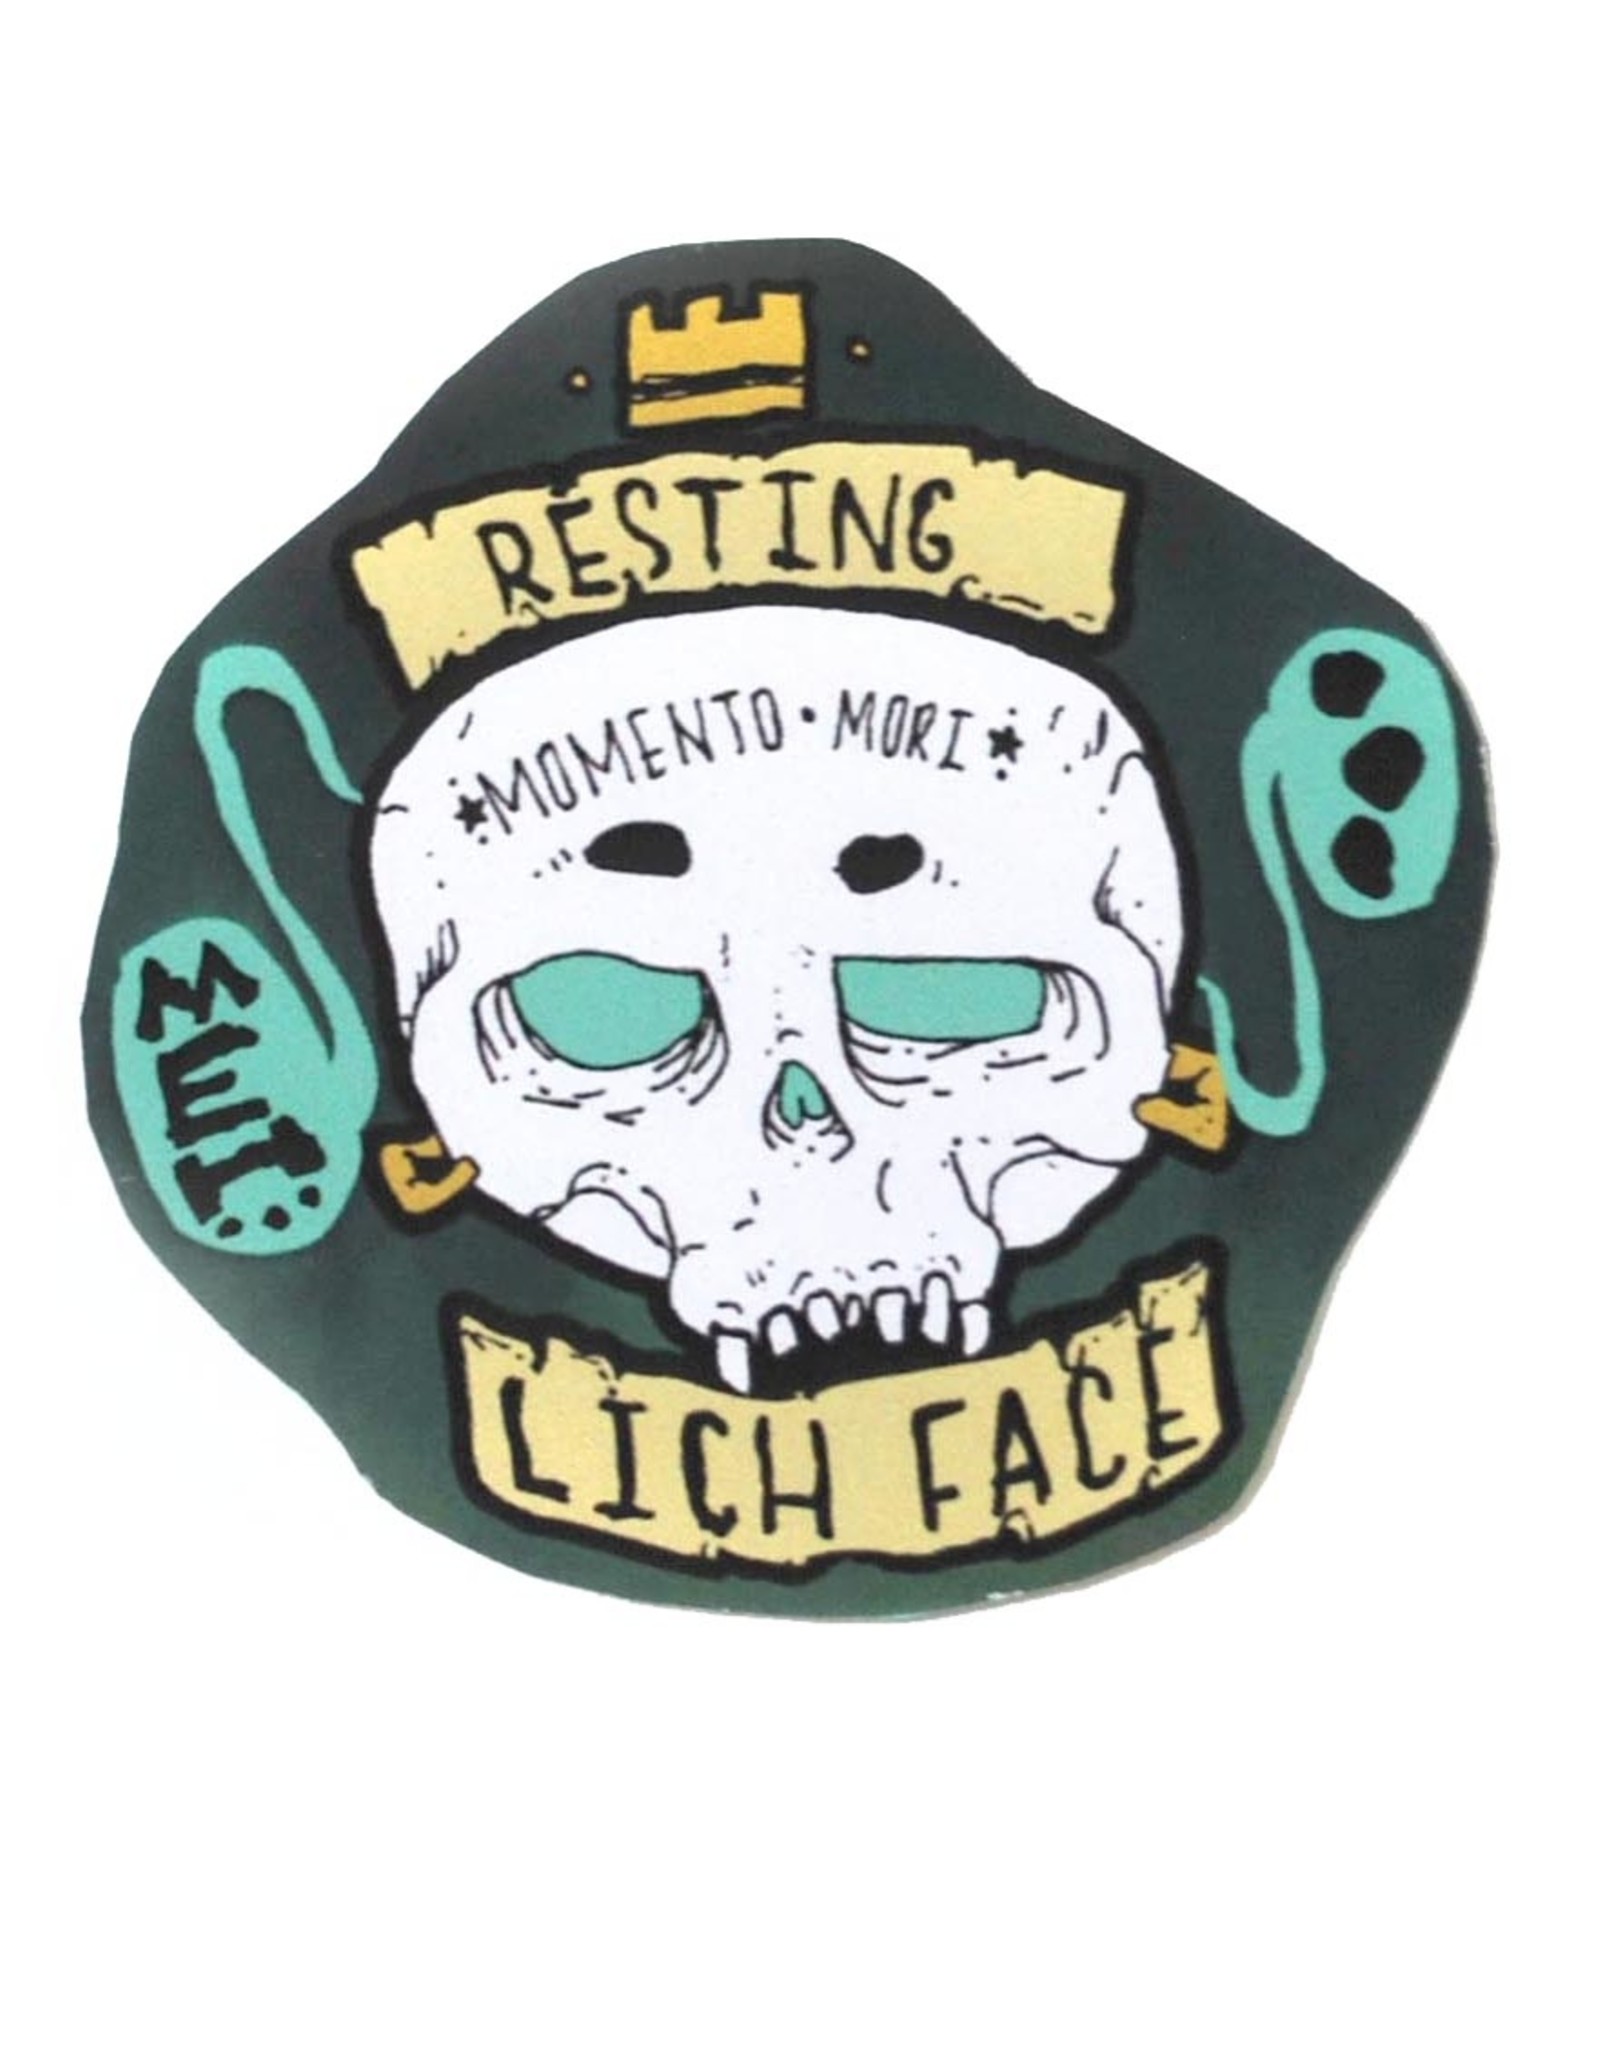 Knight Illustrations Phat Ass “Resting Lichen Face” Sticker by David Knight